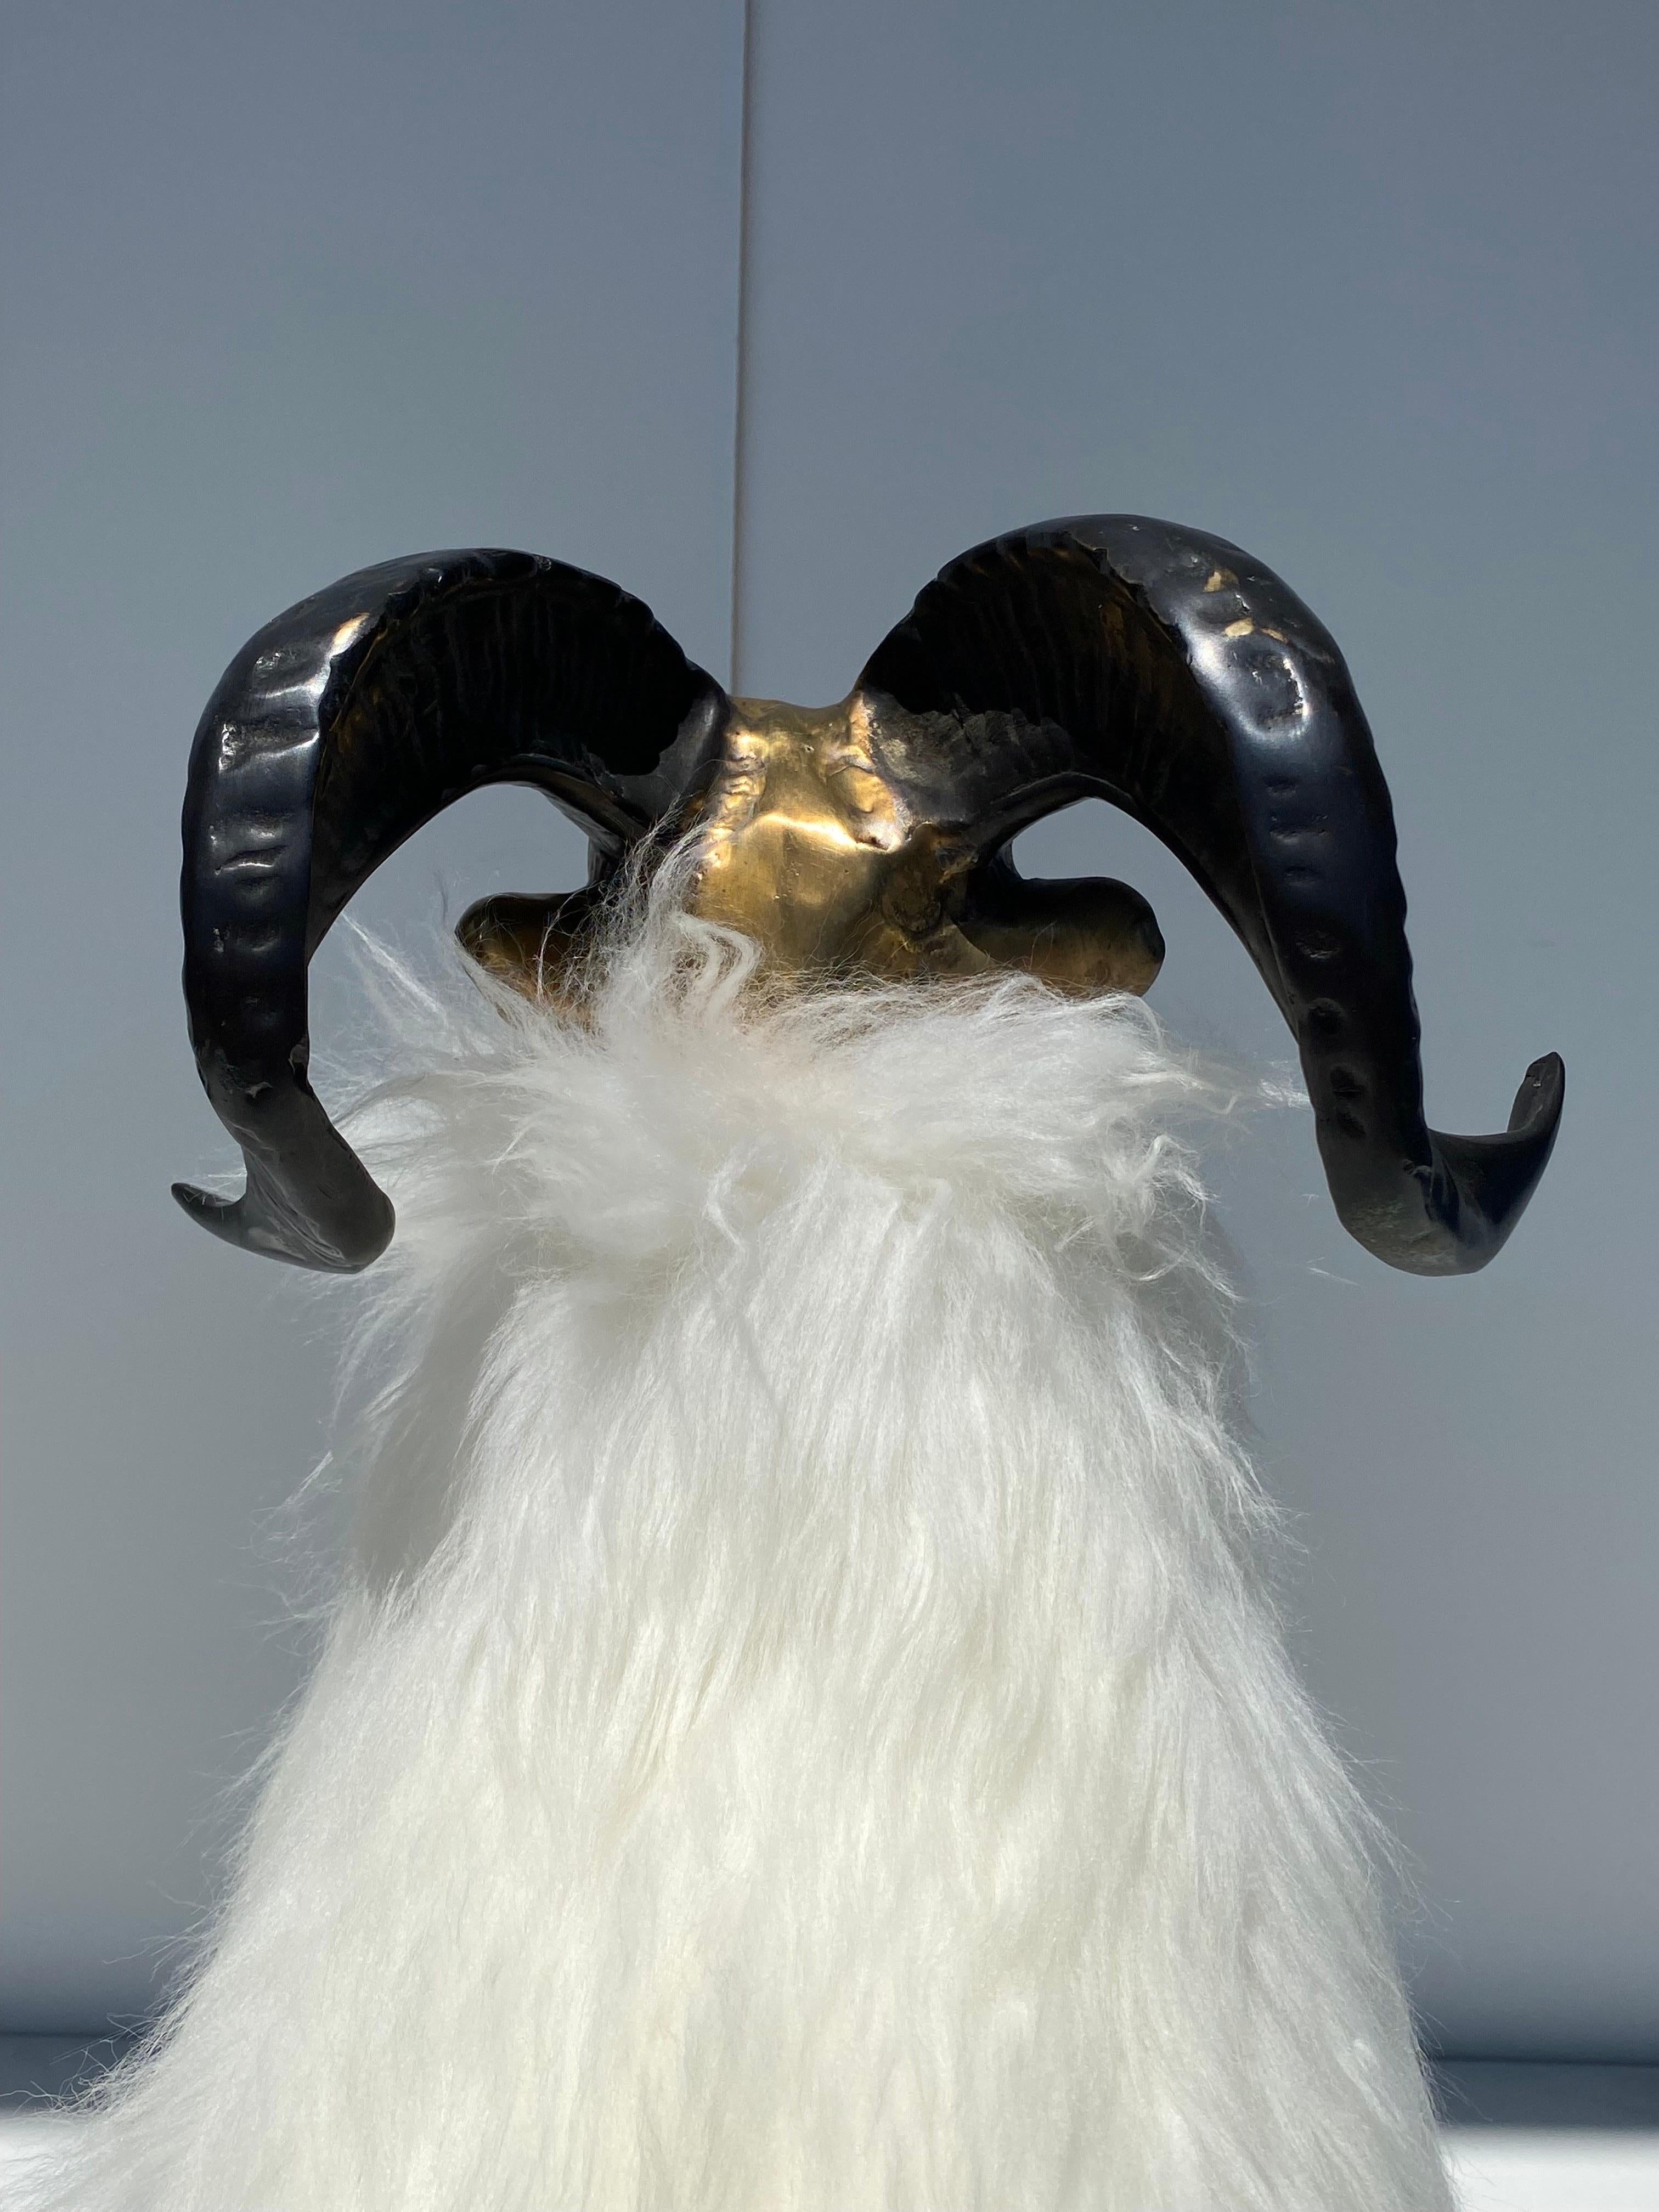 Brass Sheep / Ram Sculpture in White Fur  For Sale 5